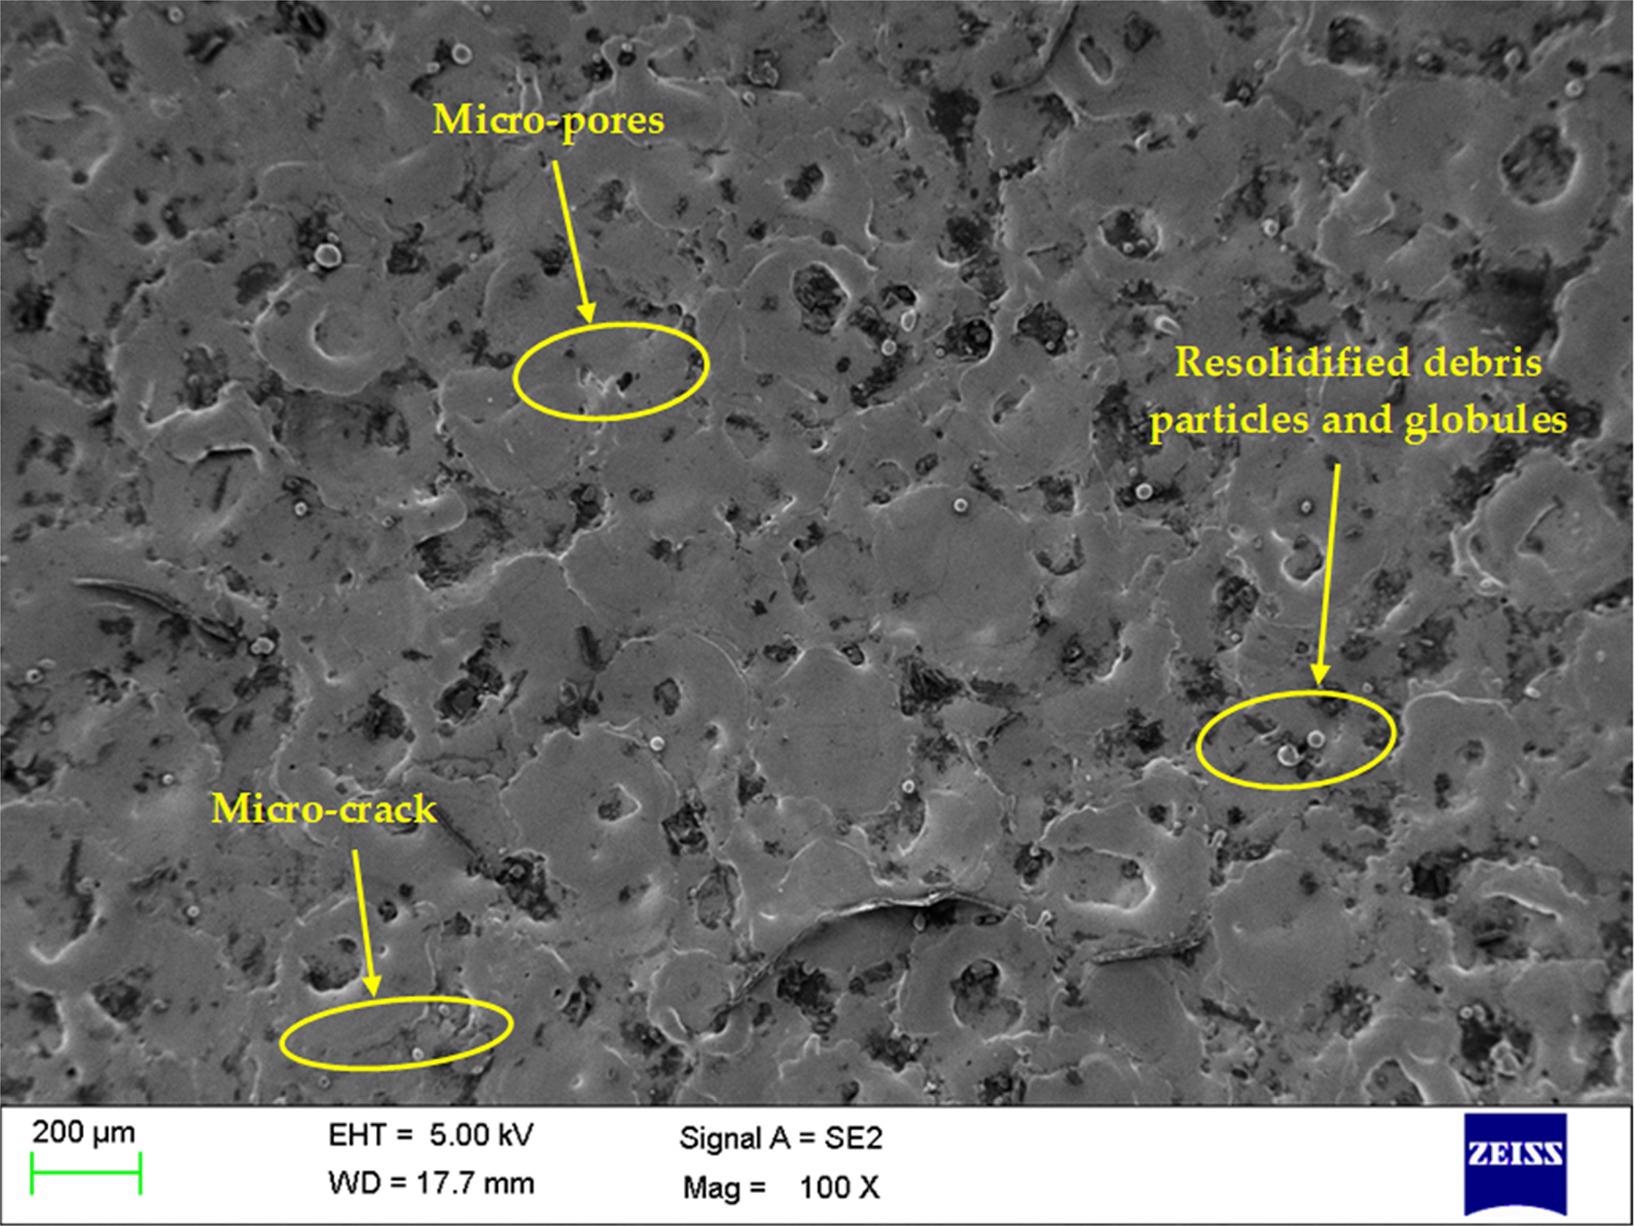 SEM analysis of machined Nitinol at Ton of 8 µs, Toff of 6 µs, PC of 2 g/L, and current of 6 A.